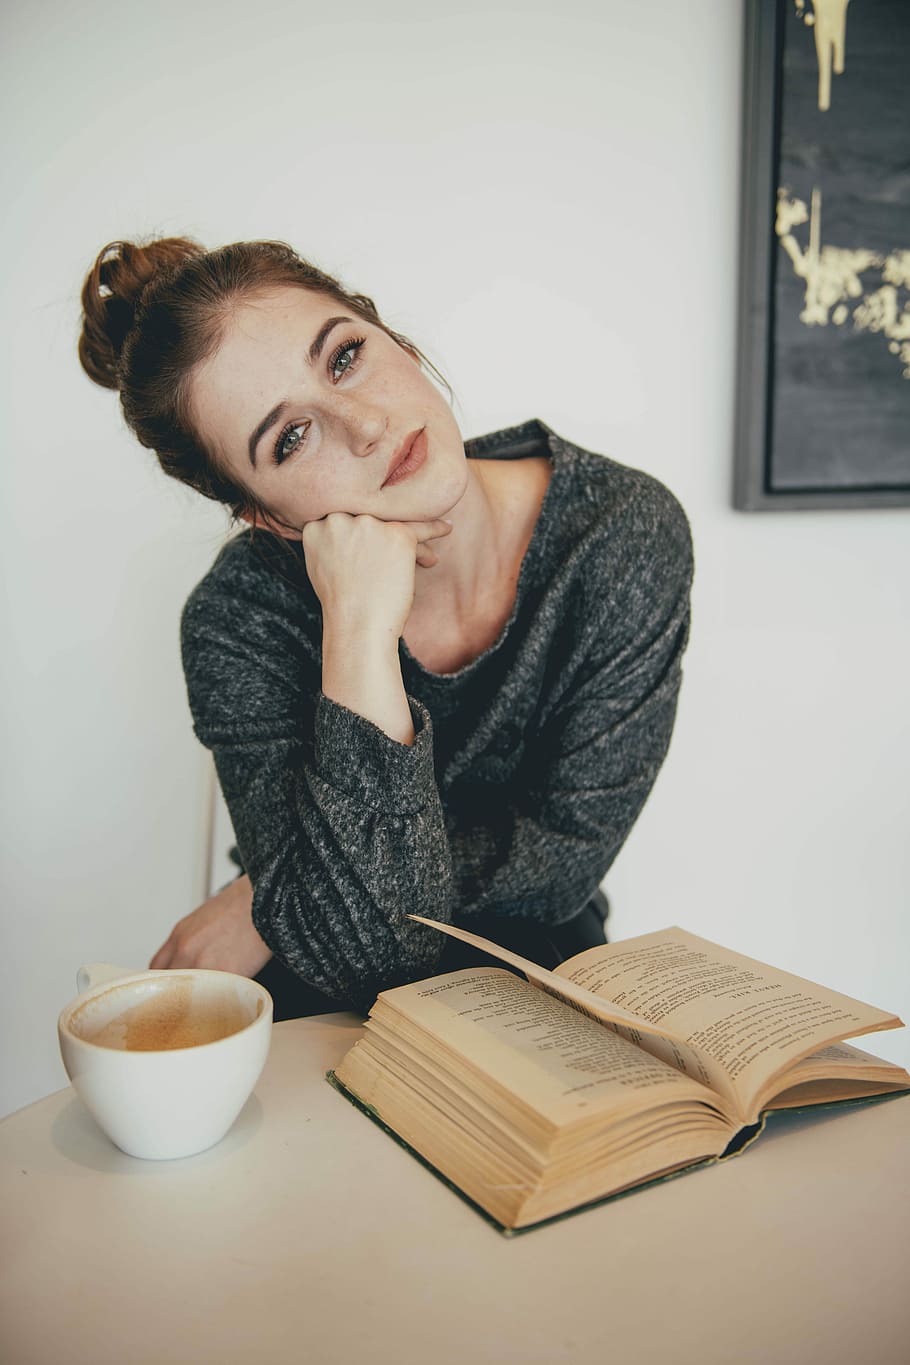 brown-haired woman in black sweater near brown book, woman sitting in front of white mug and opened book